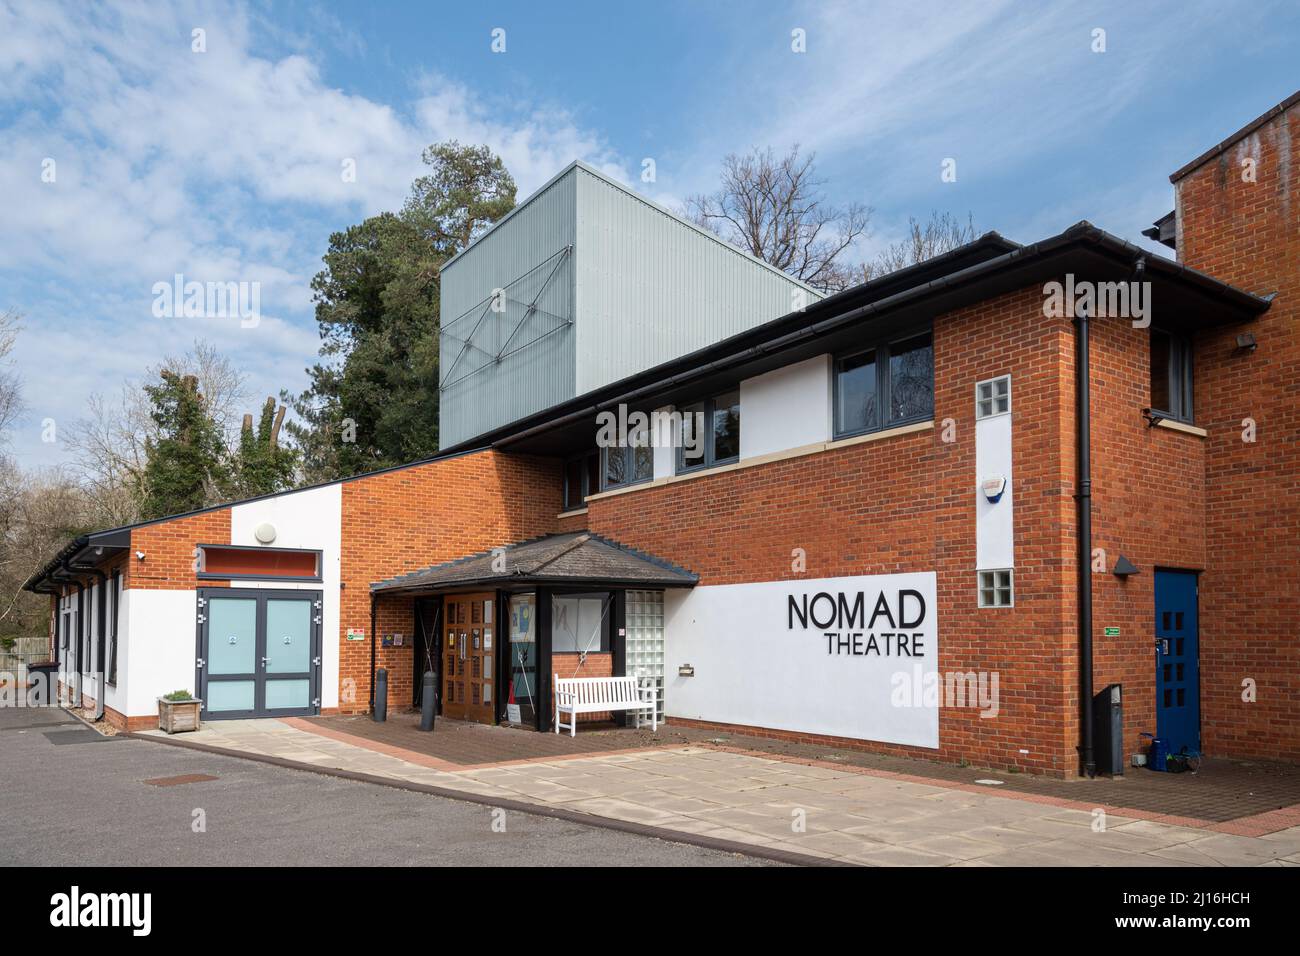 The Nomad Theatre in East Horsley, Surrey, England, UK Stock Photo